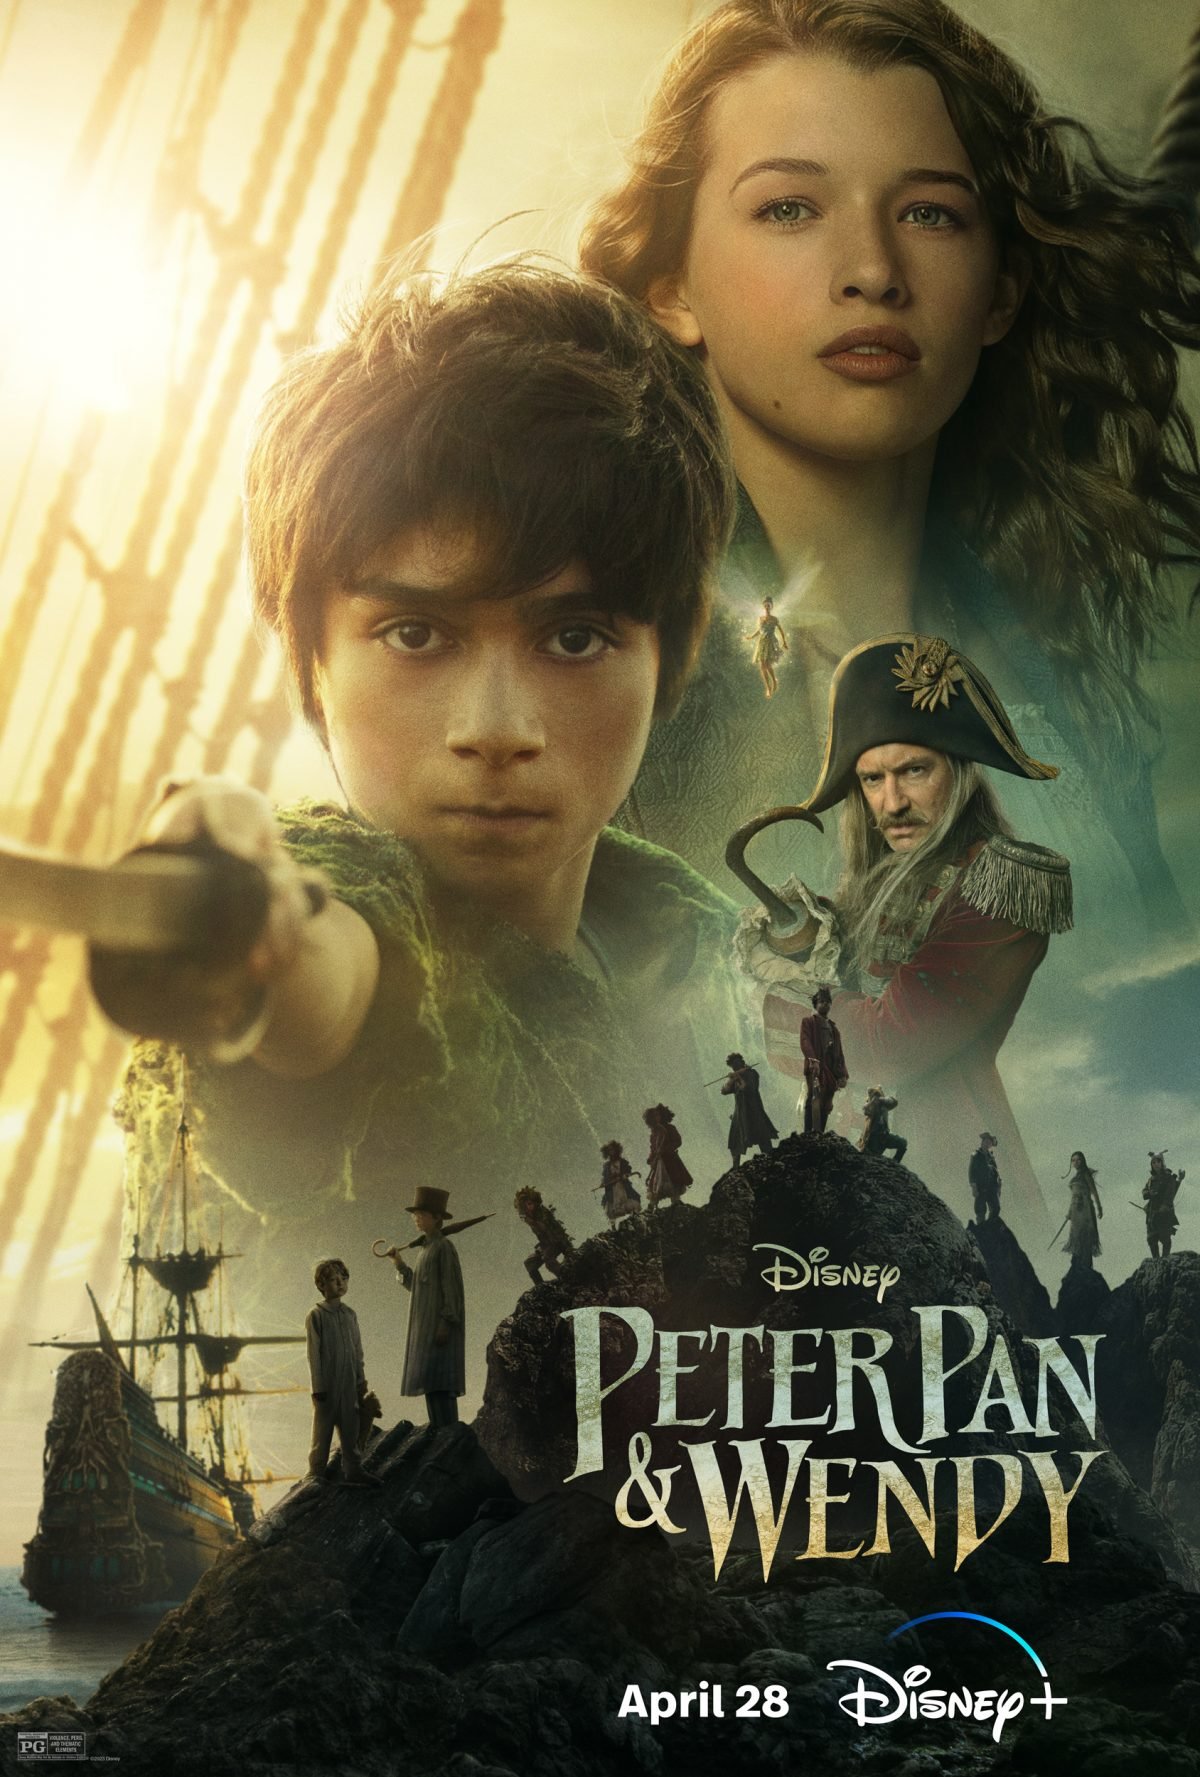 The Peter Pan & Wendy key art showing all the characters in the live-action movie